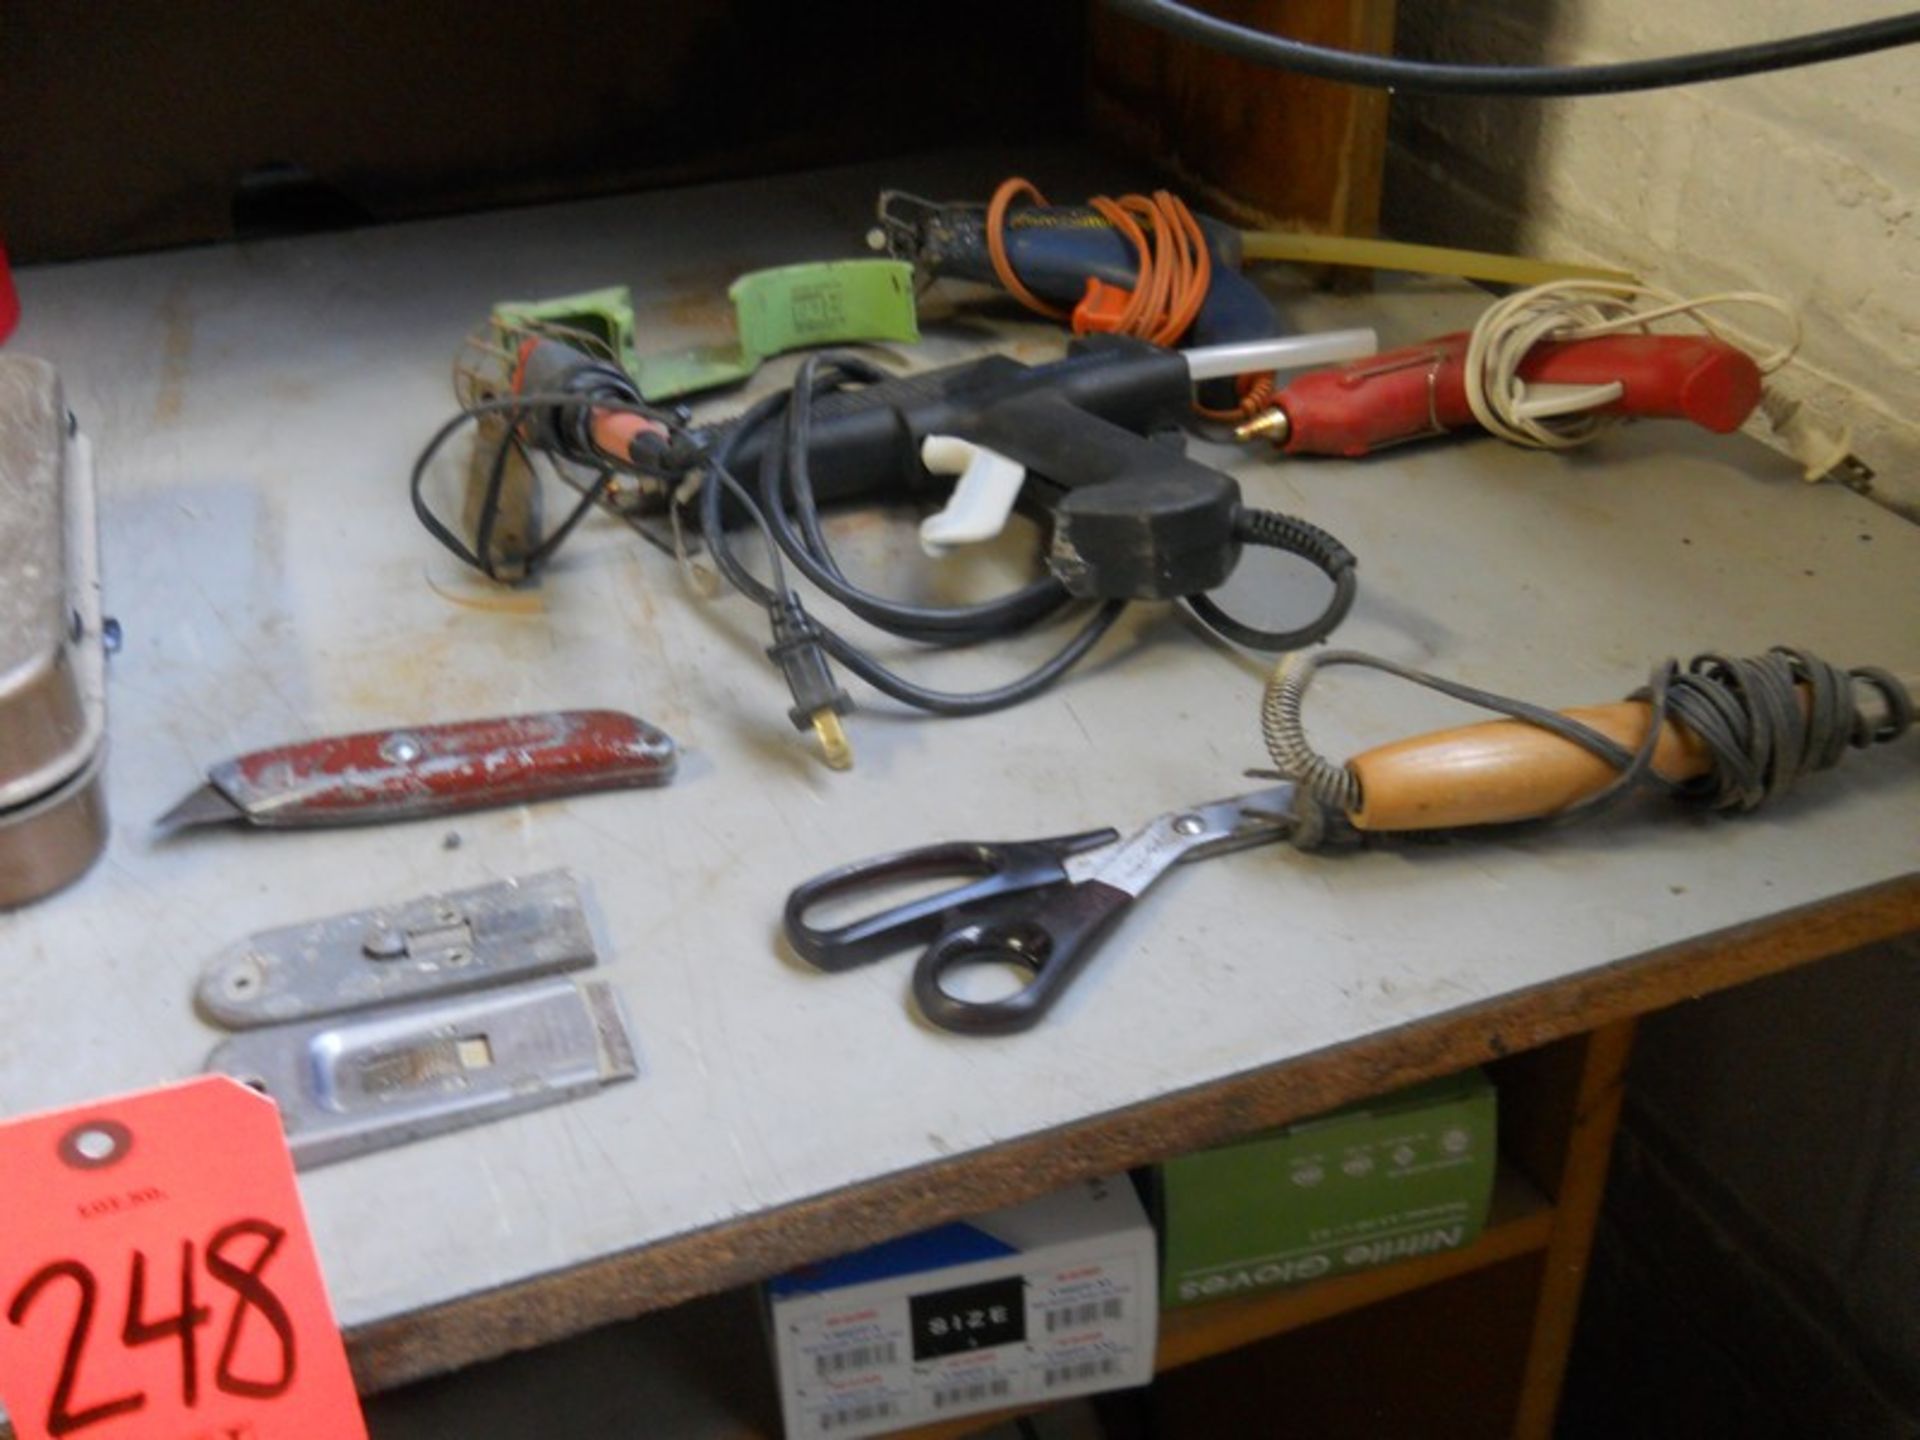 Lot - Shipping & Receiving Department, Including: Scale; Tape Dispenser; Glue Guns; Hand Held Iron - Image 5 of 7